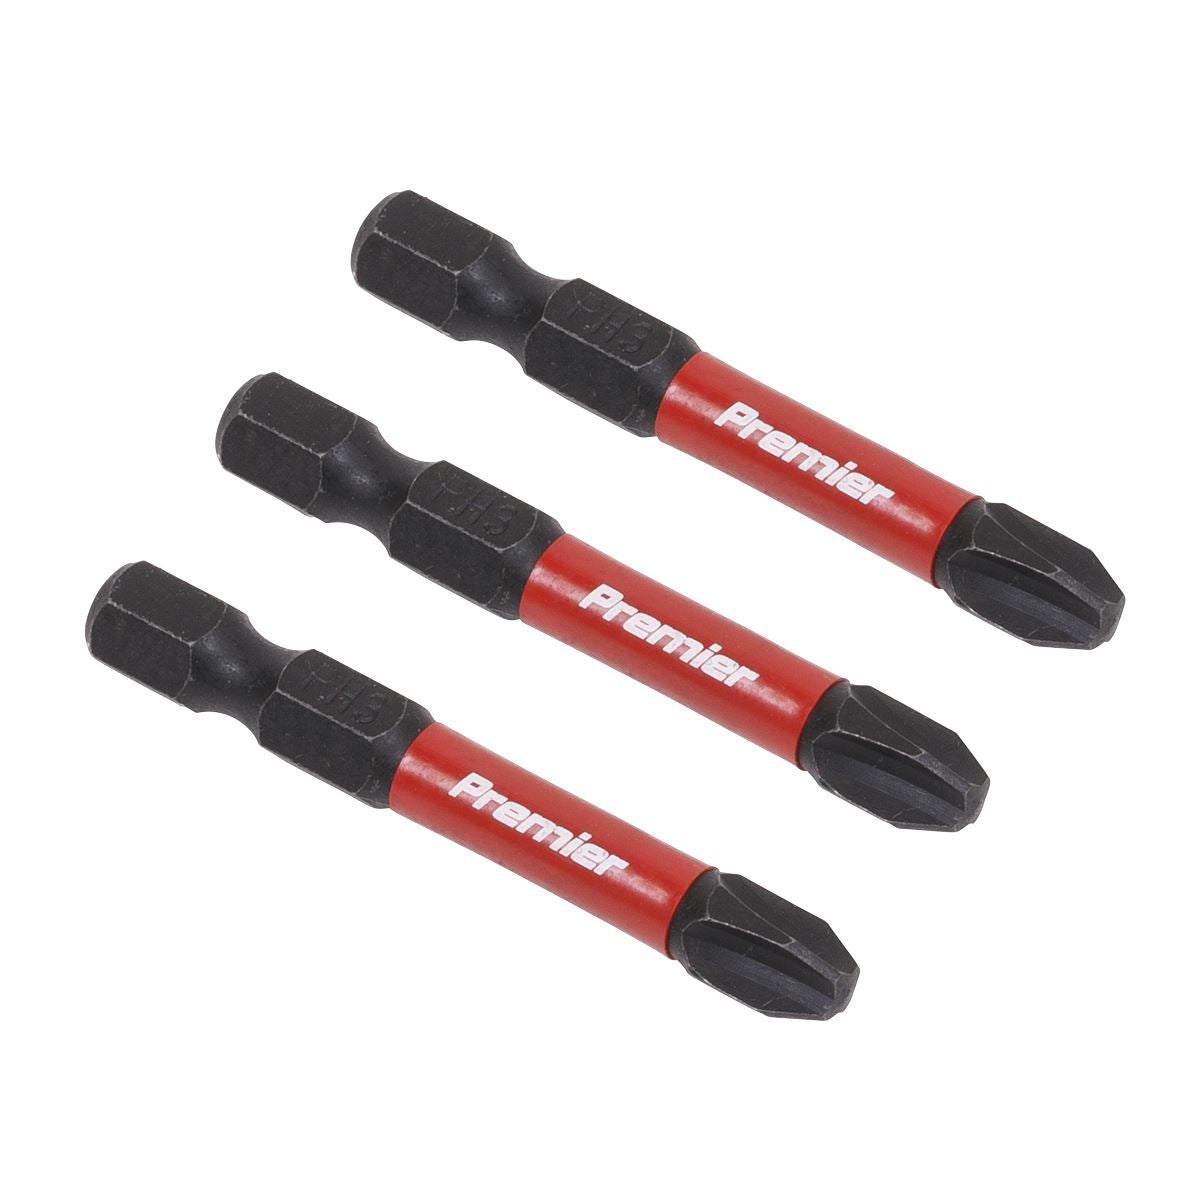 Sealey Premier Phillips #3 Impact Power Tool Bits 50mm - 3pc